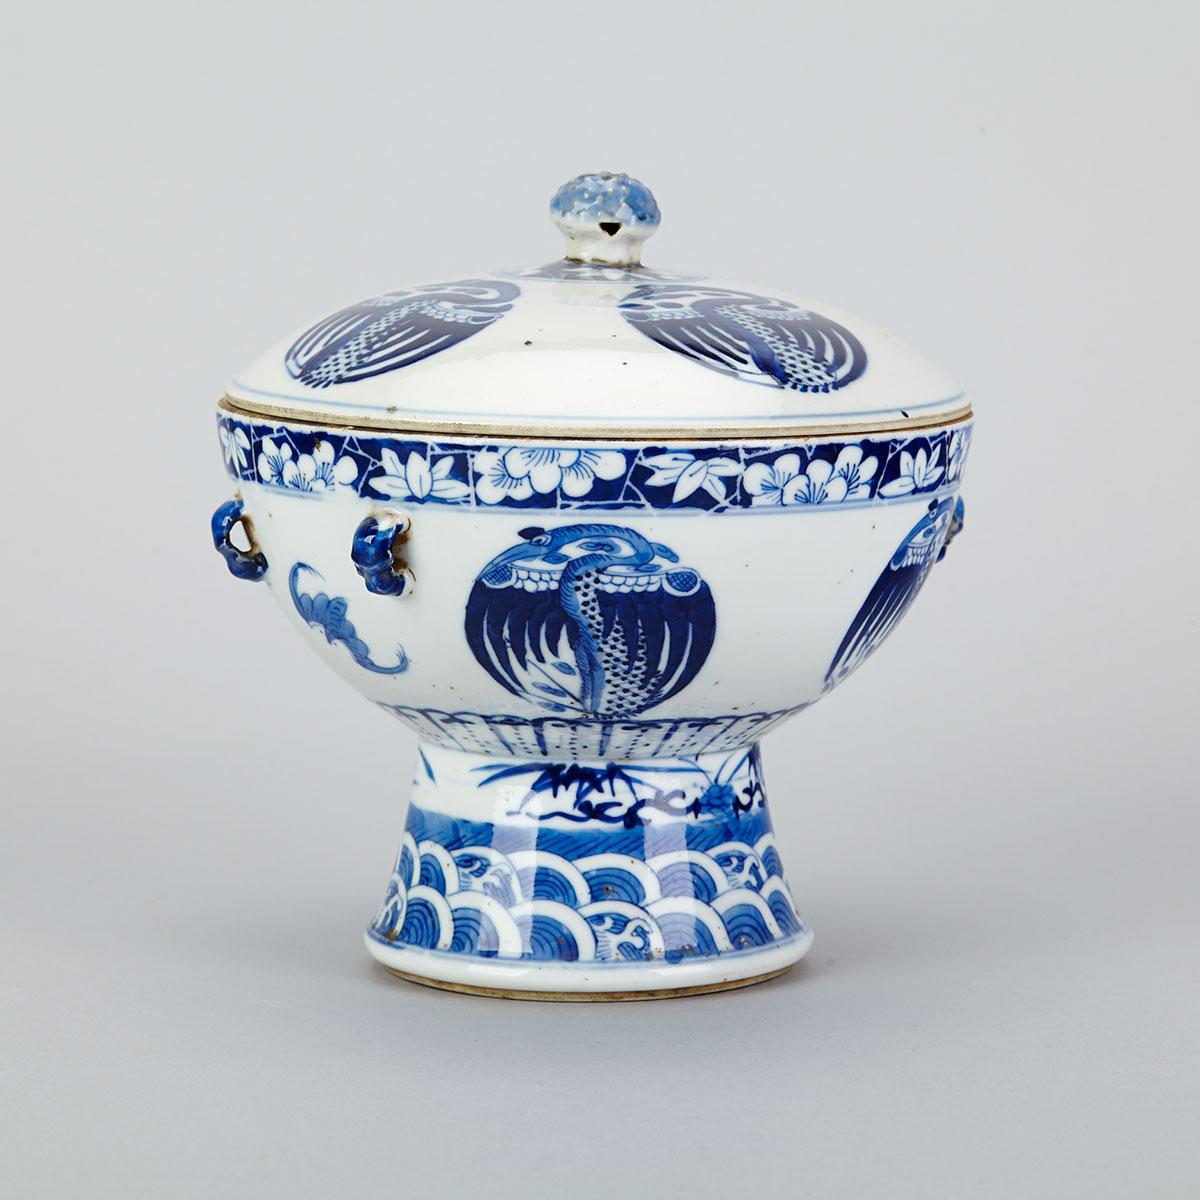 Blue and White Covered Footed Bowl, Early 20th Century